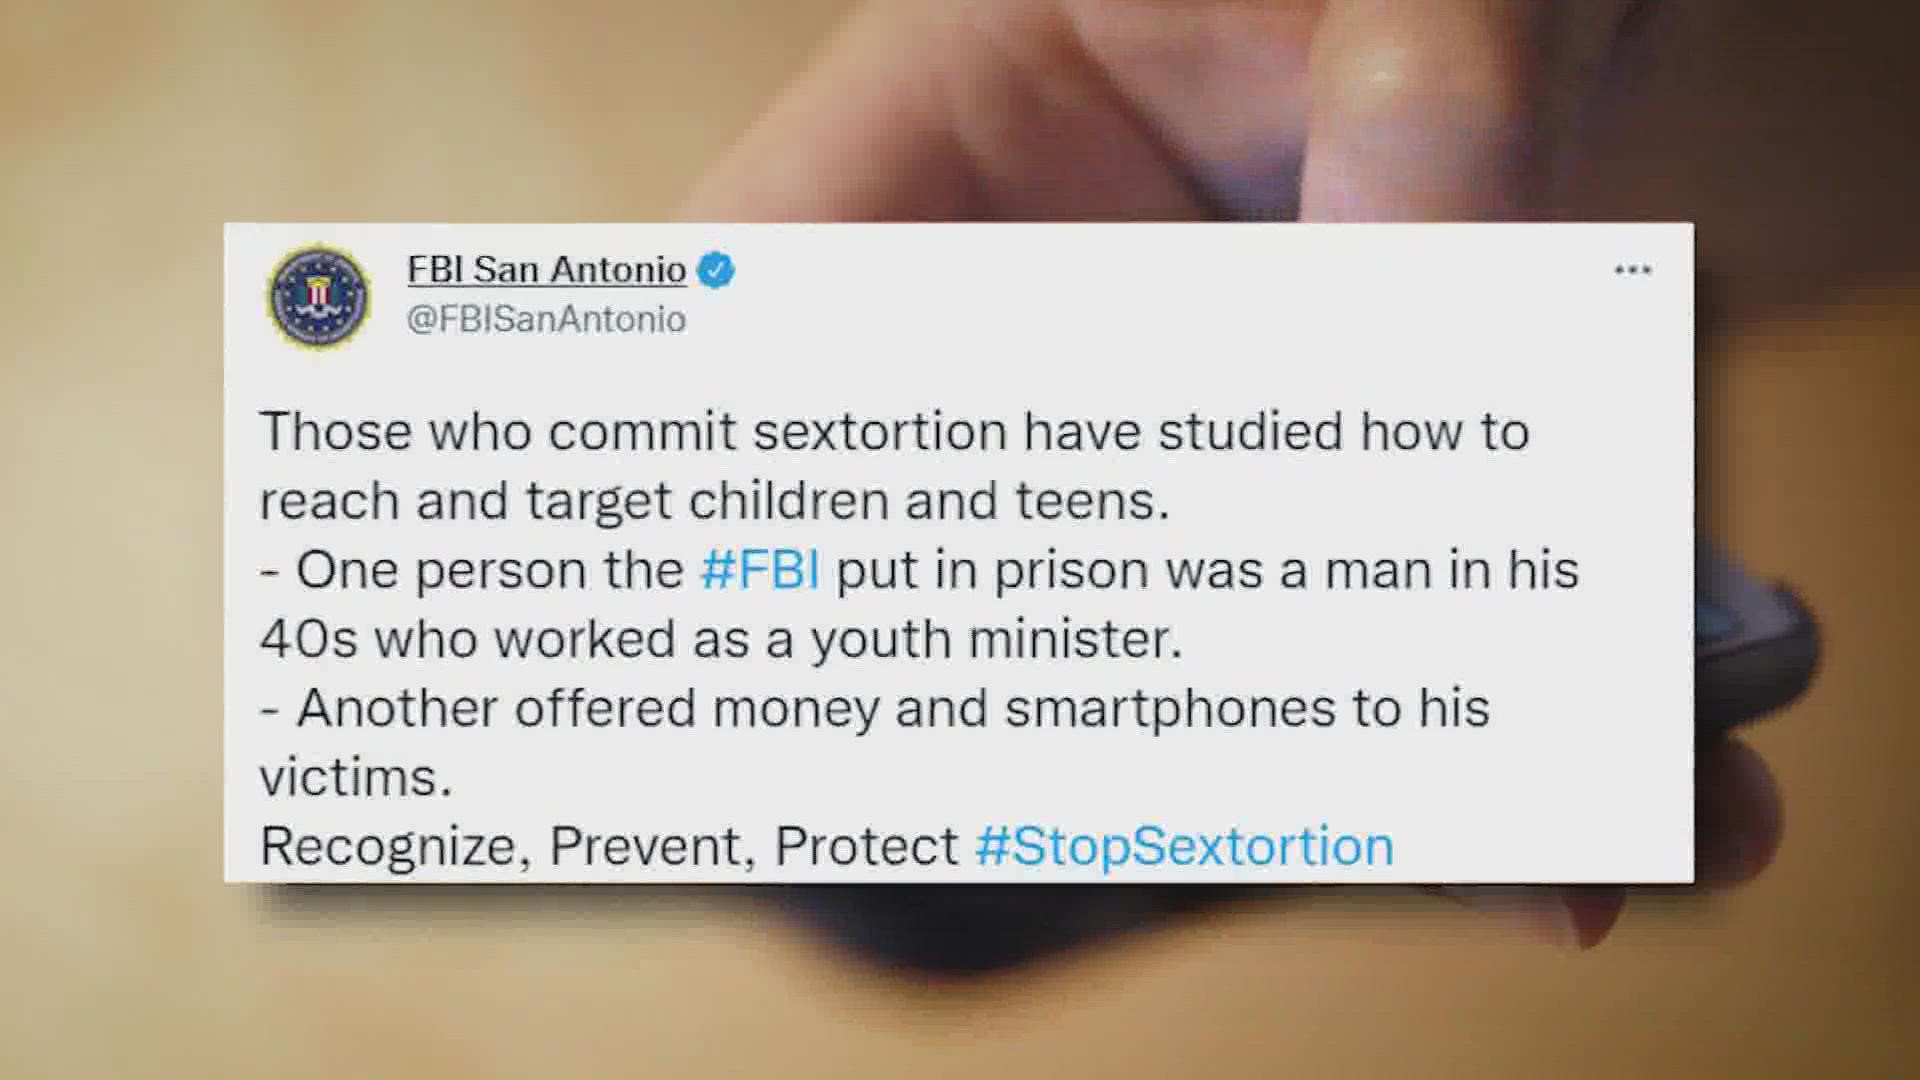 Sextortion involves victims being threatened, coerced or blackmailed into sending money or explicit images online & can happen on any social media site or app.